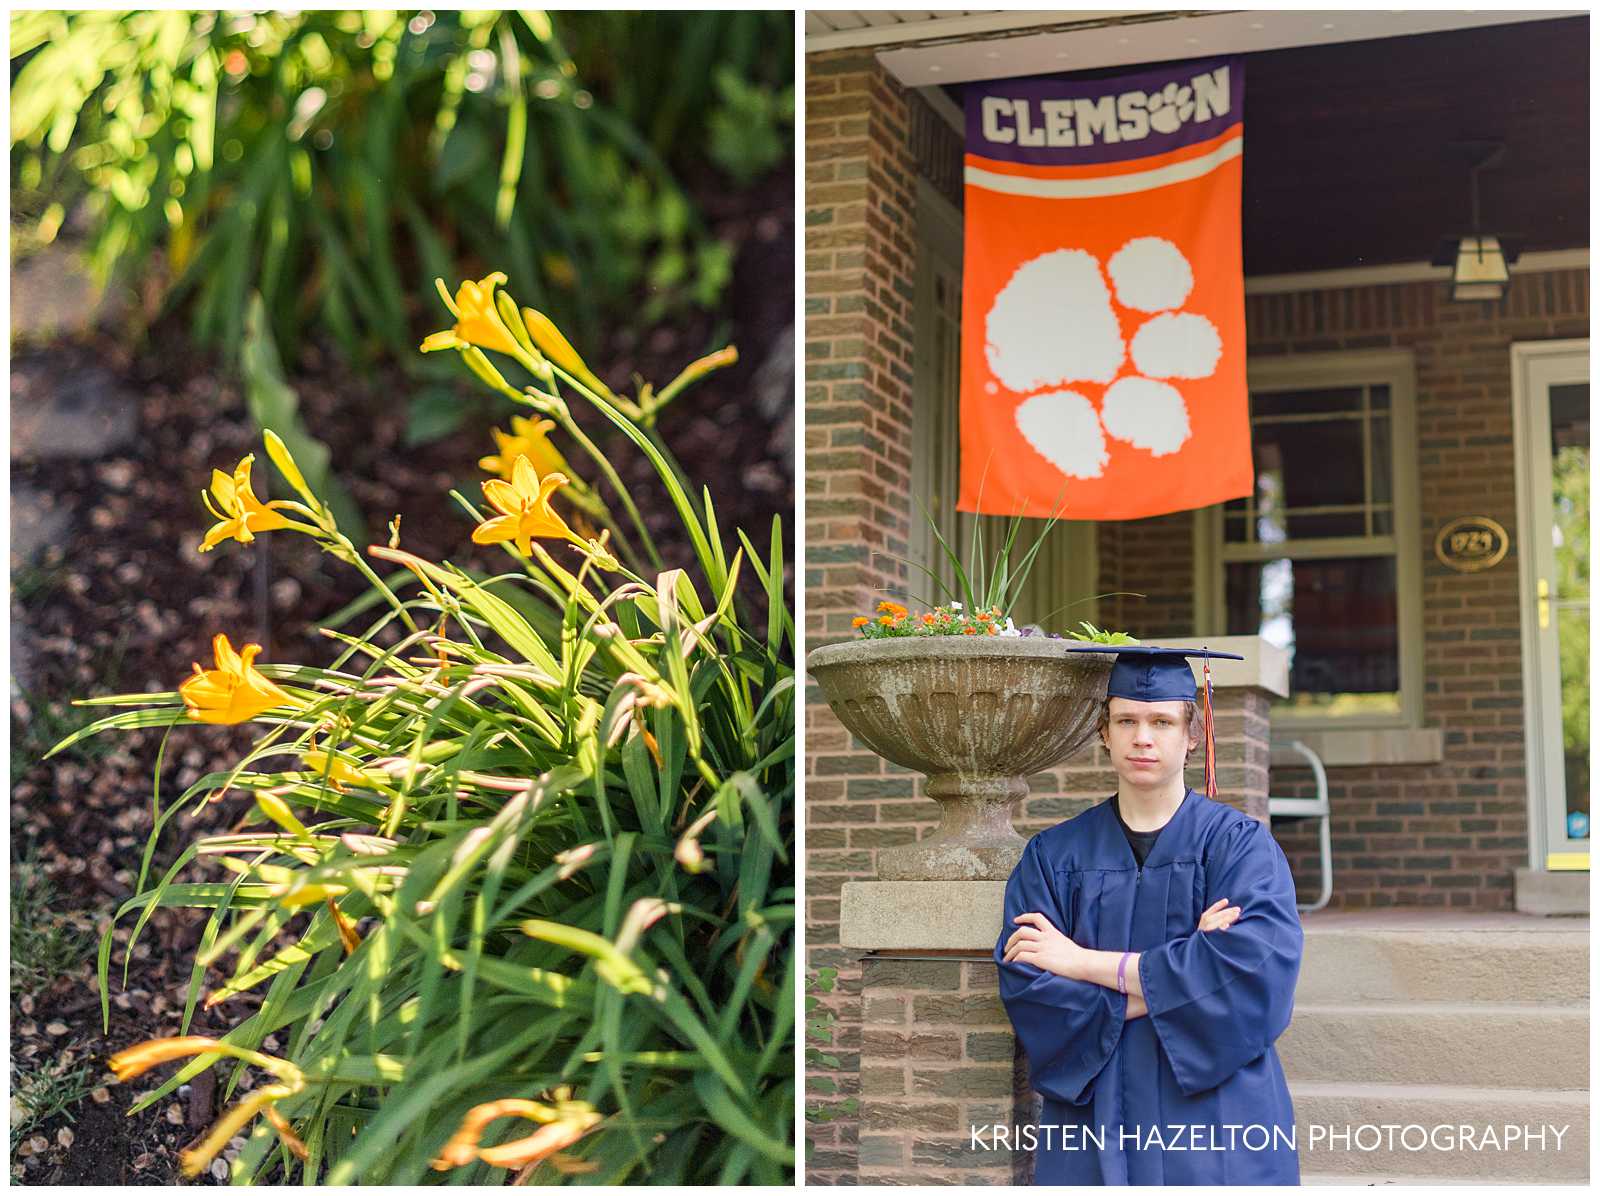 High school senior boy wearing cap and gown with Clemson university flag in the background